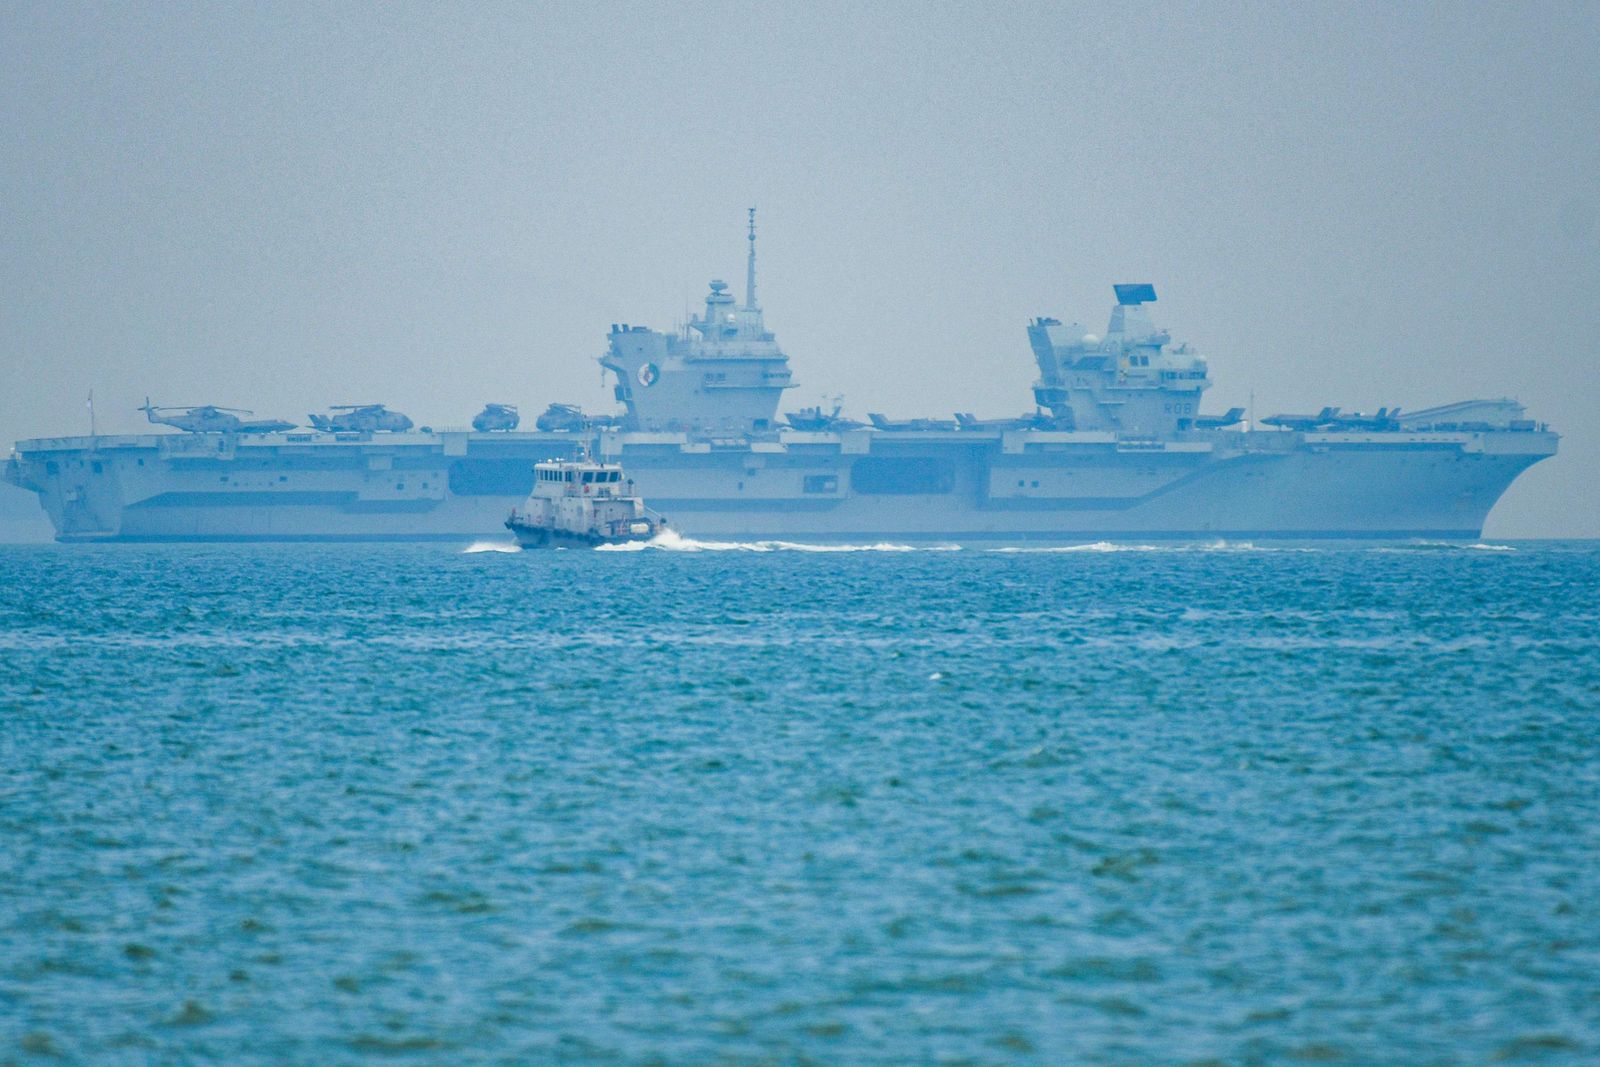 A boat passes in front of HMS Queen Elizabeth of Britain's Carrier Strike Group in Singapore on October 12, 2021. (Photo by Roslan RAHMAN / AFP) - AFP